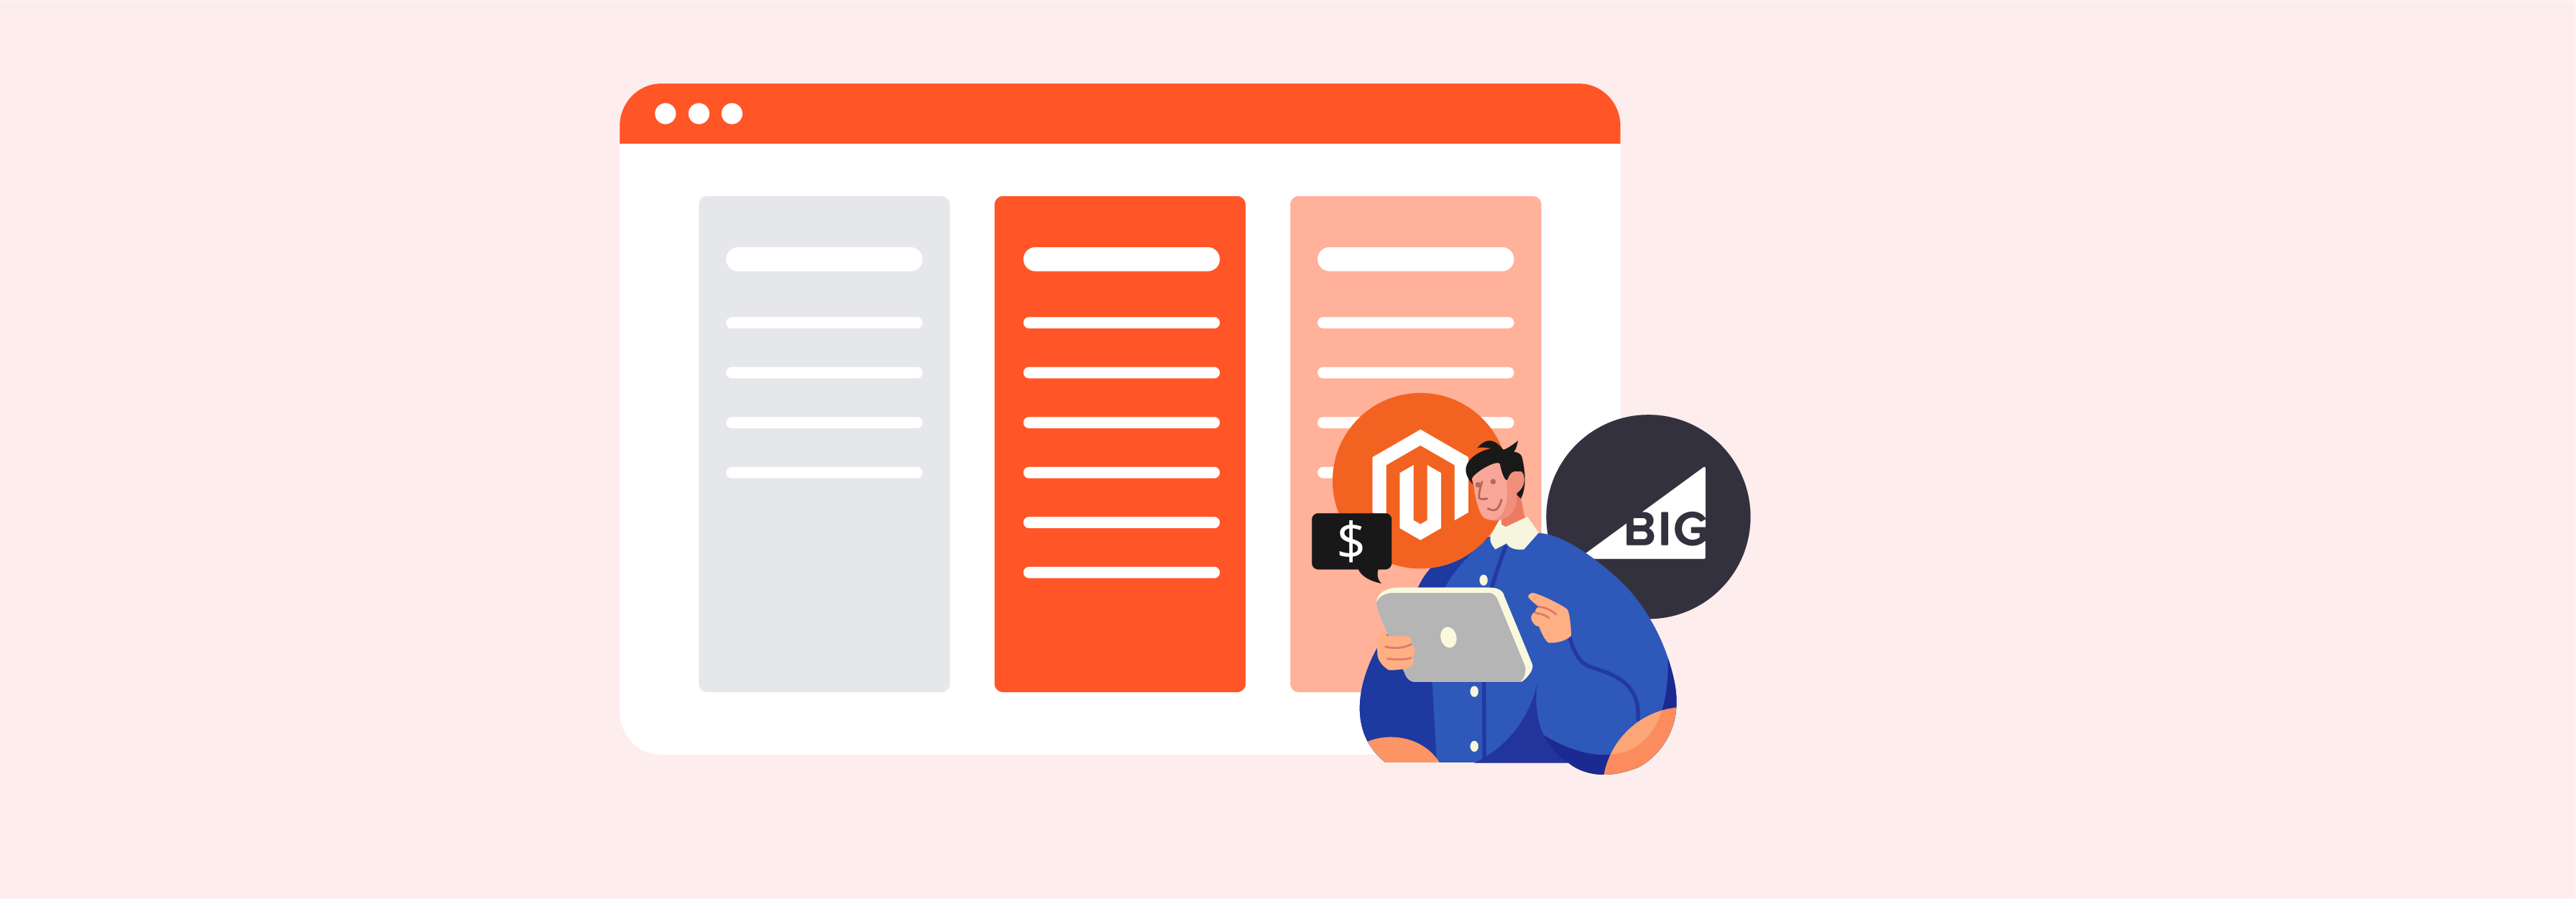 Overview of pricing tiers for BigCommerce and Magento platforms